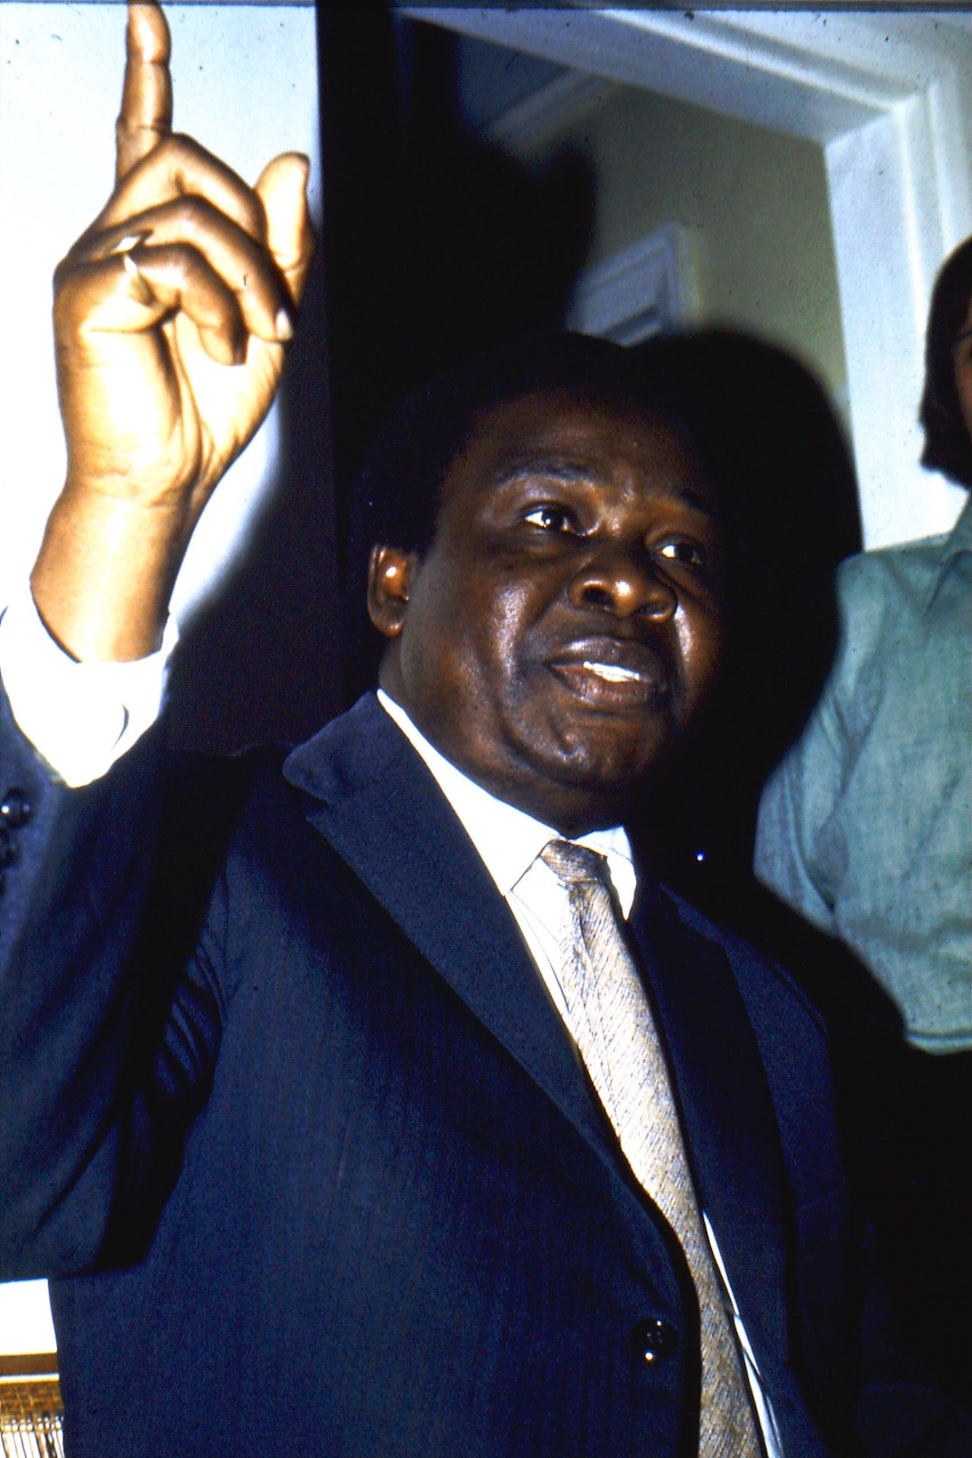 Hand of the Cause Enoch Olinga in Henley-on-Thames, England, c. 1972